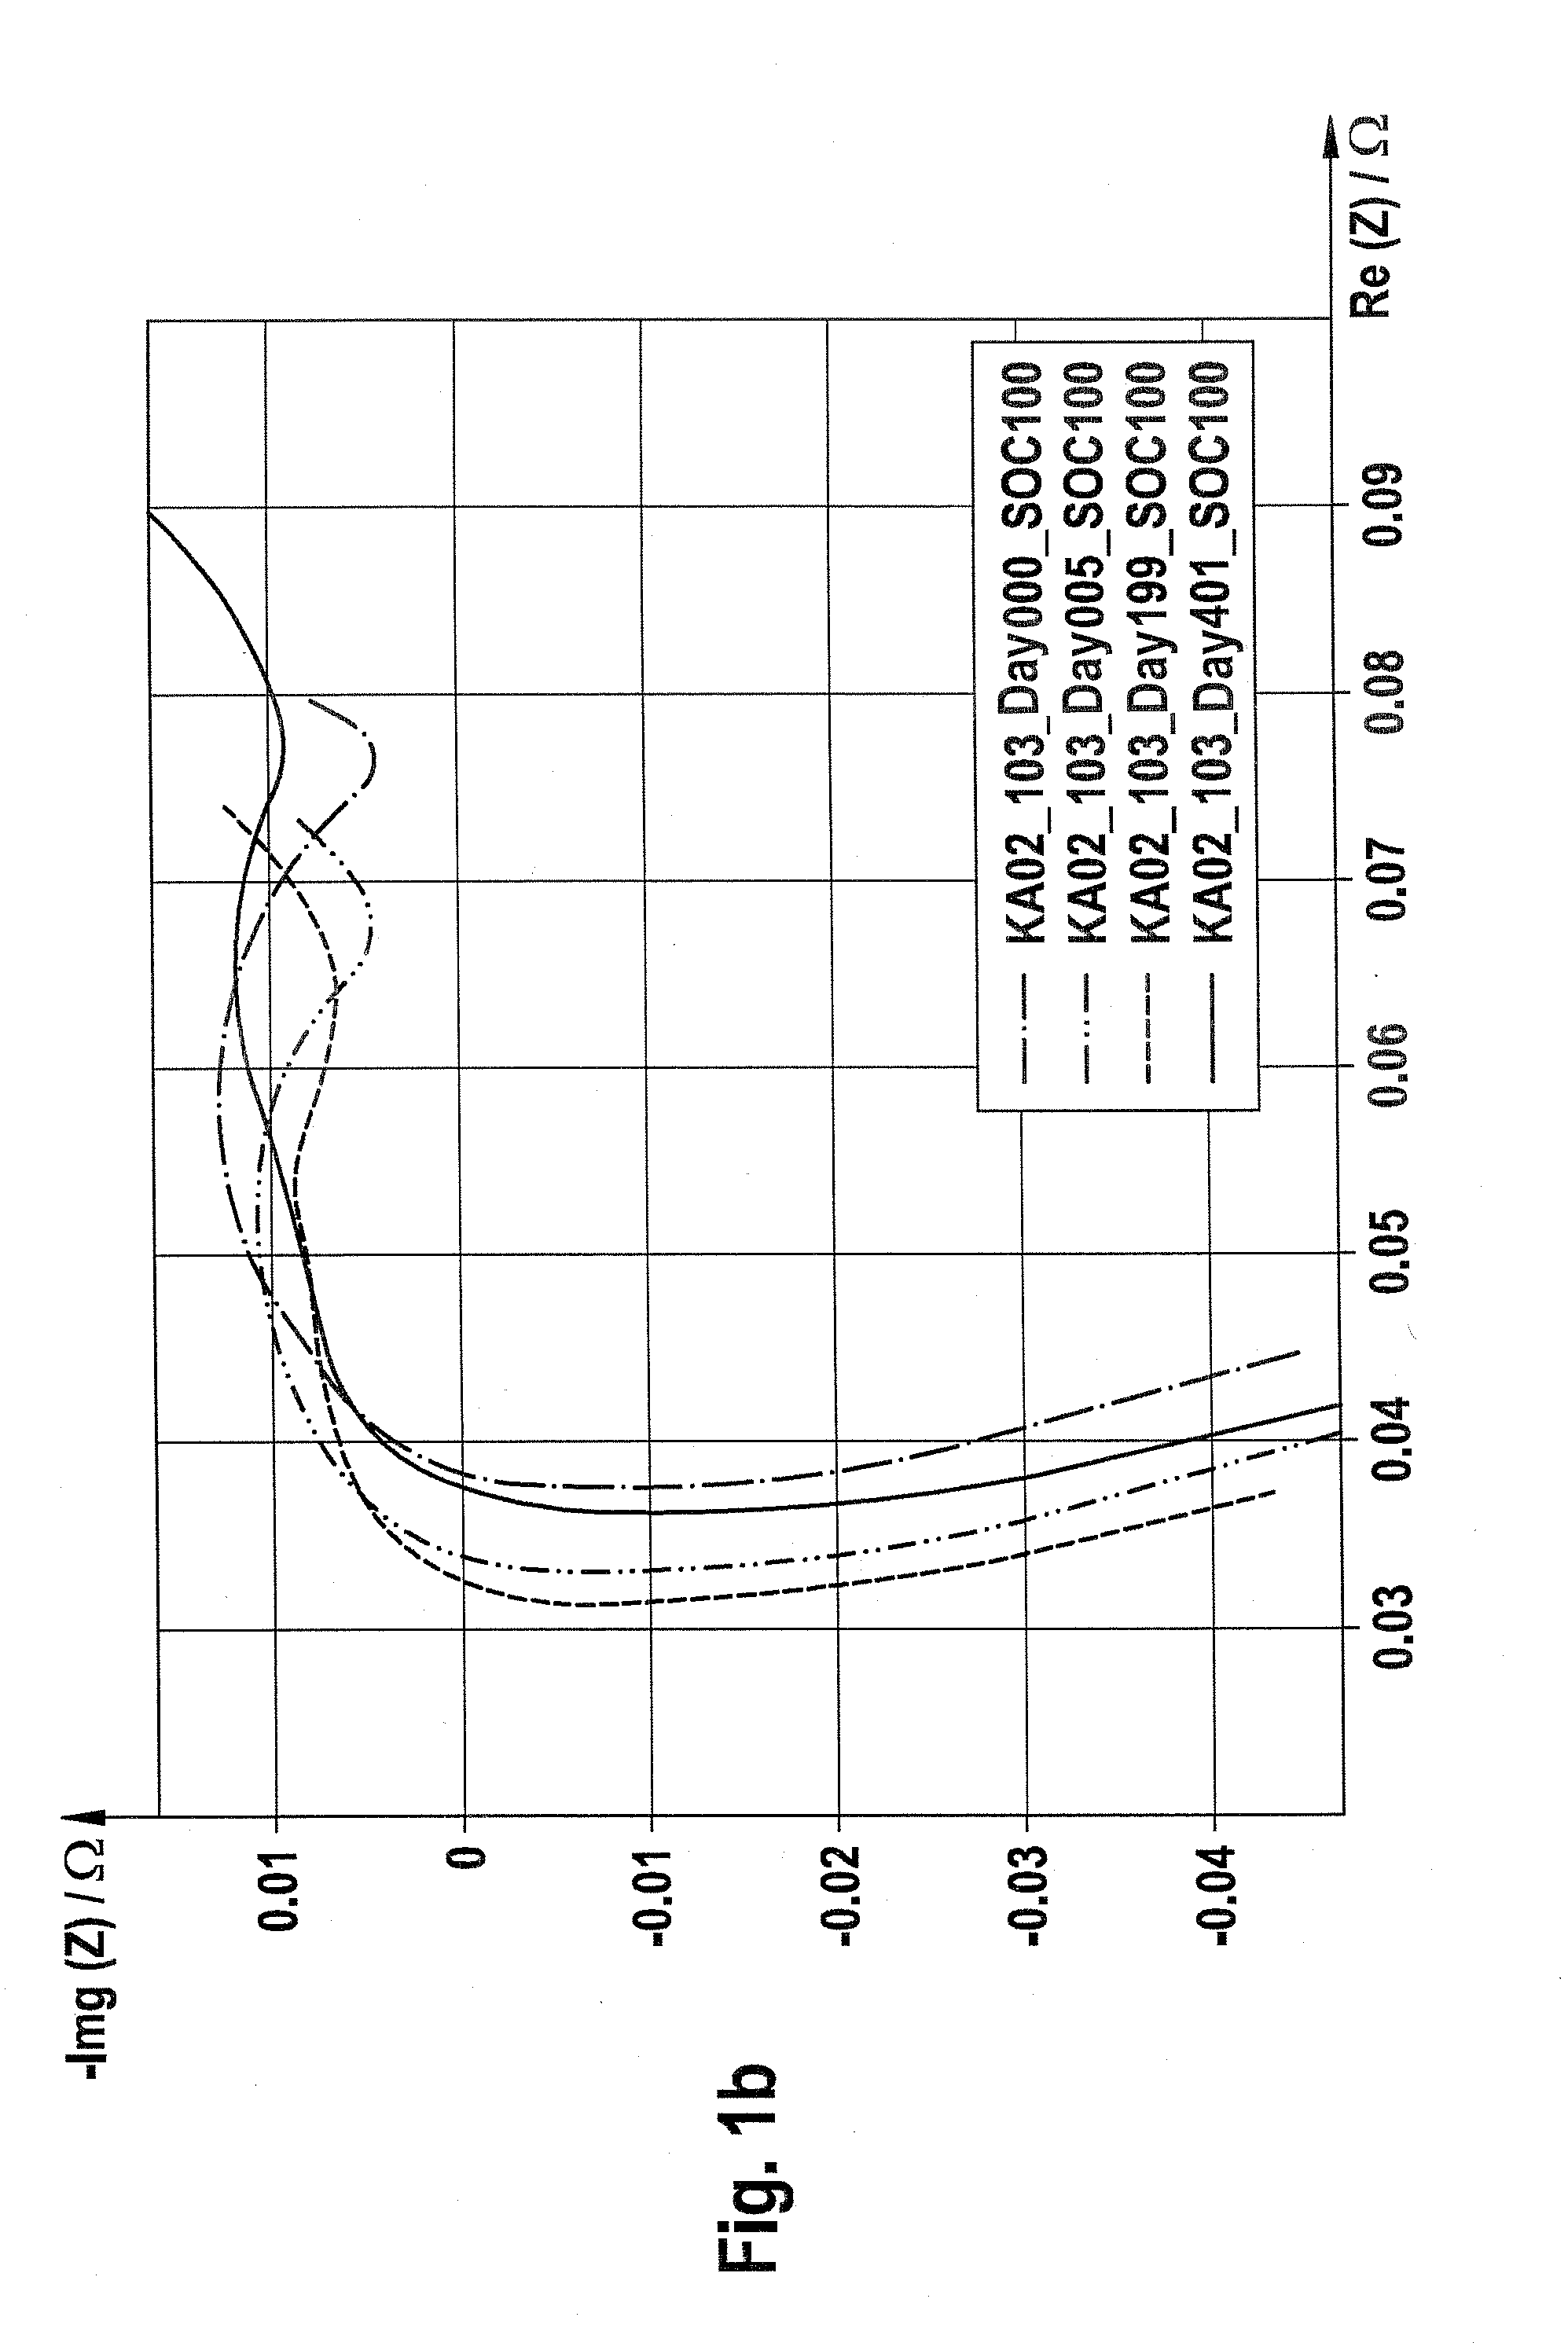 Method for determining an aging condition of a battery cell by means of impedance spectroscopy